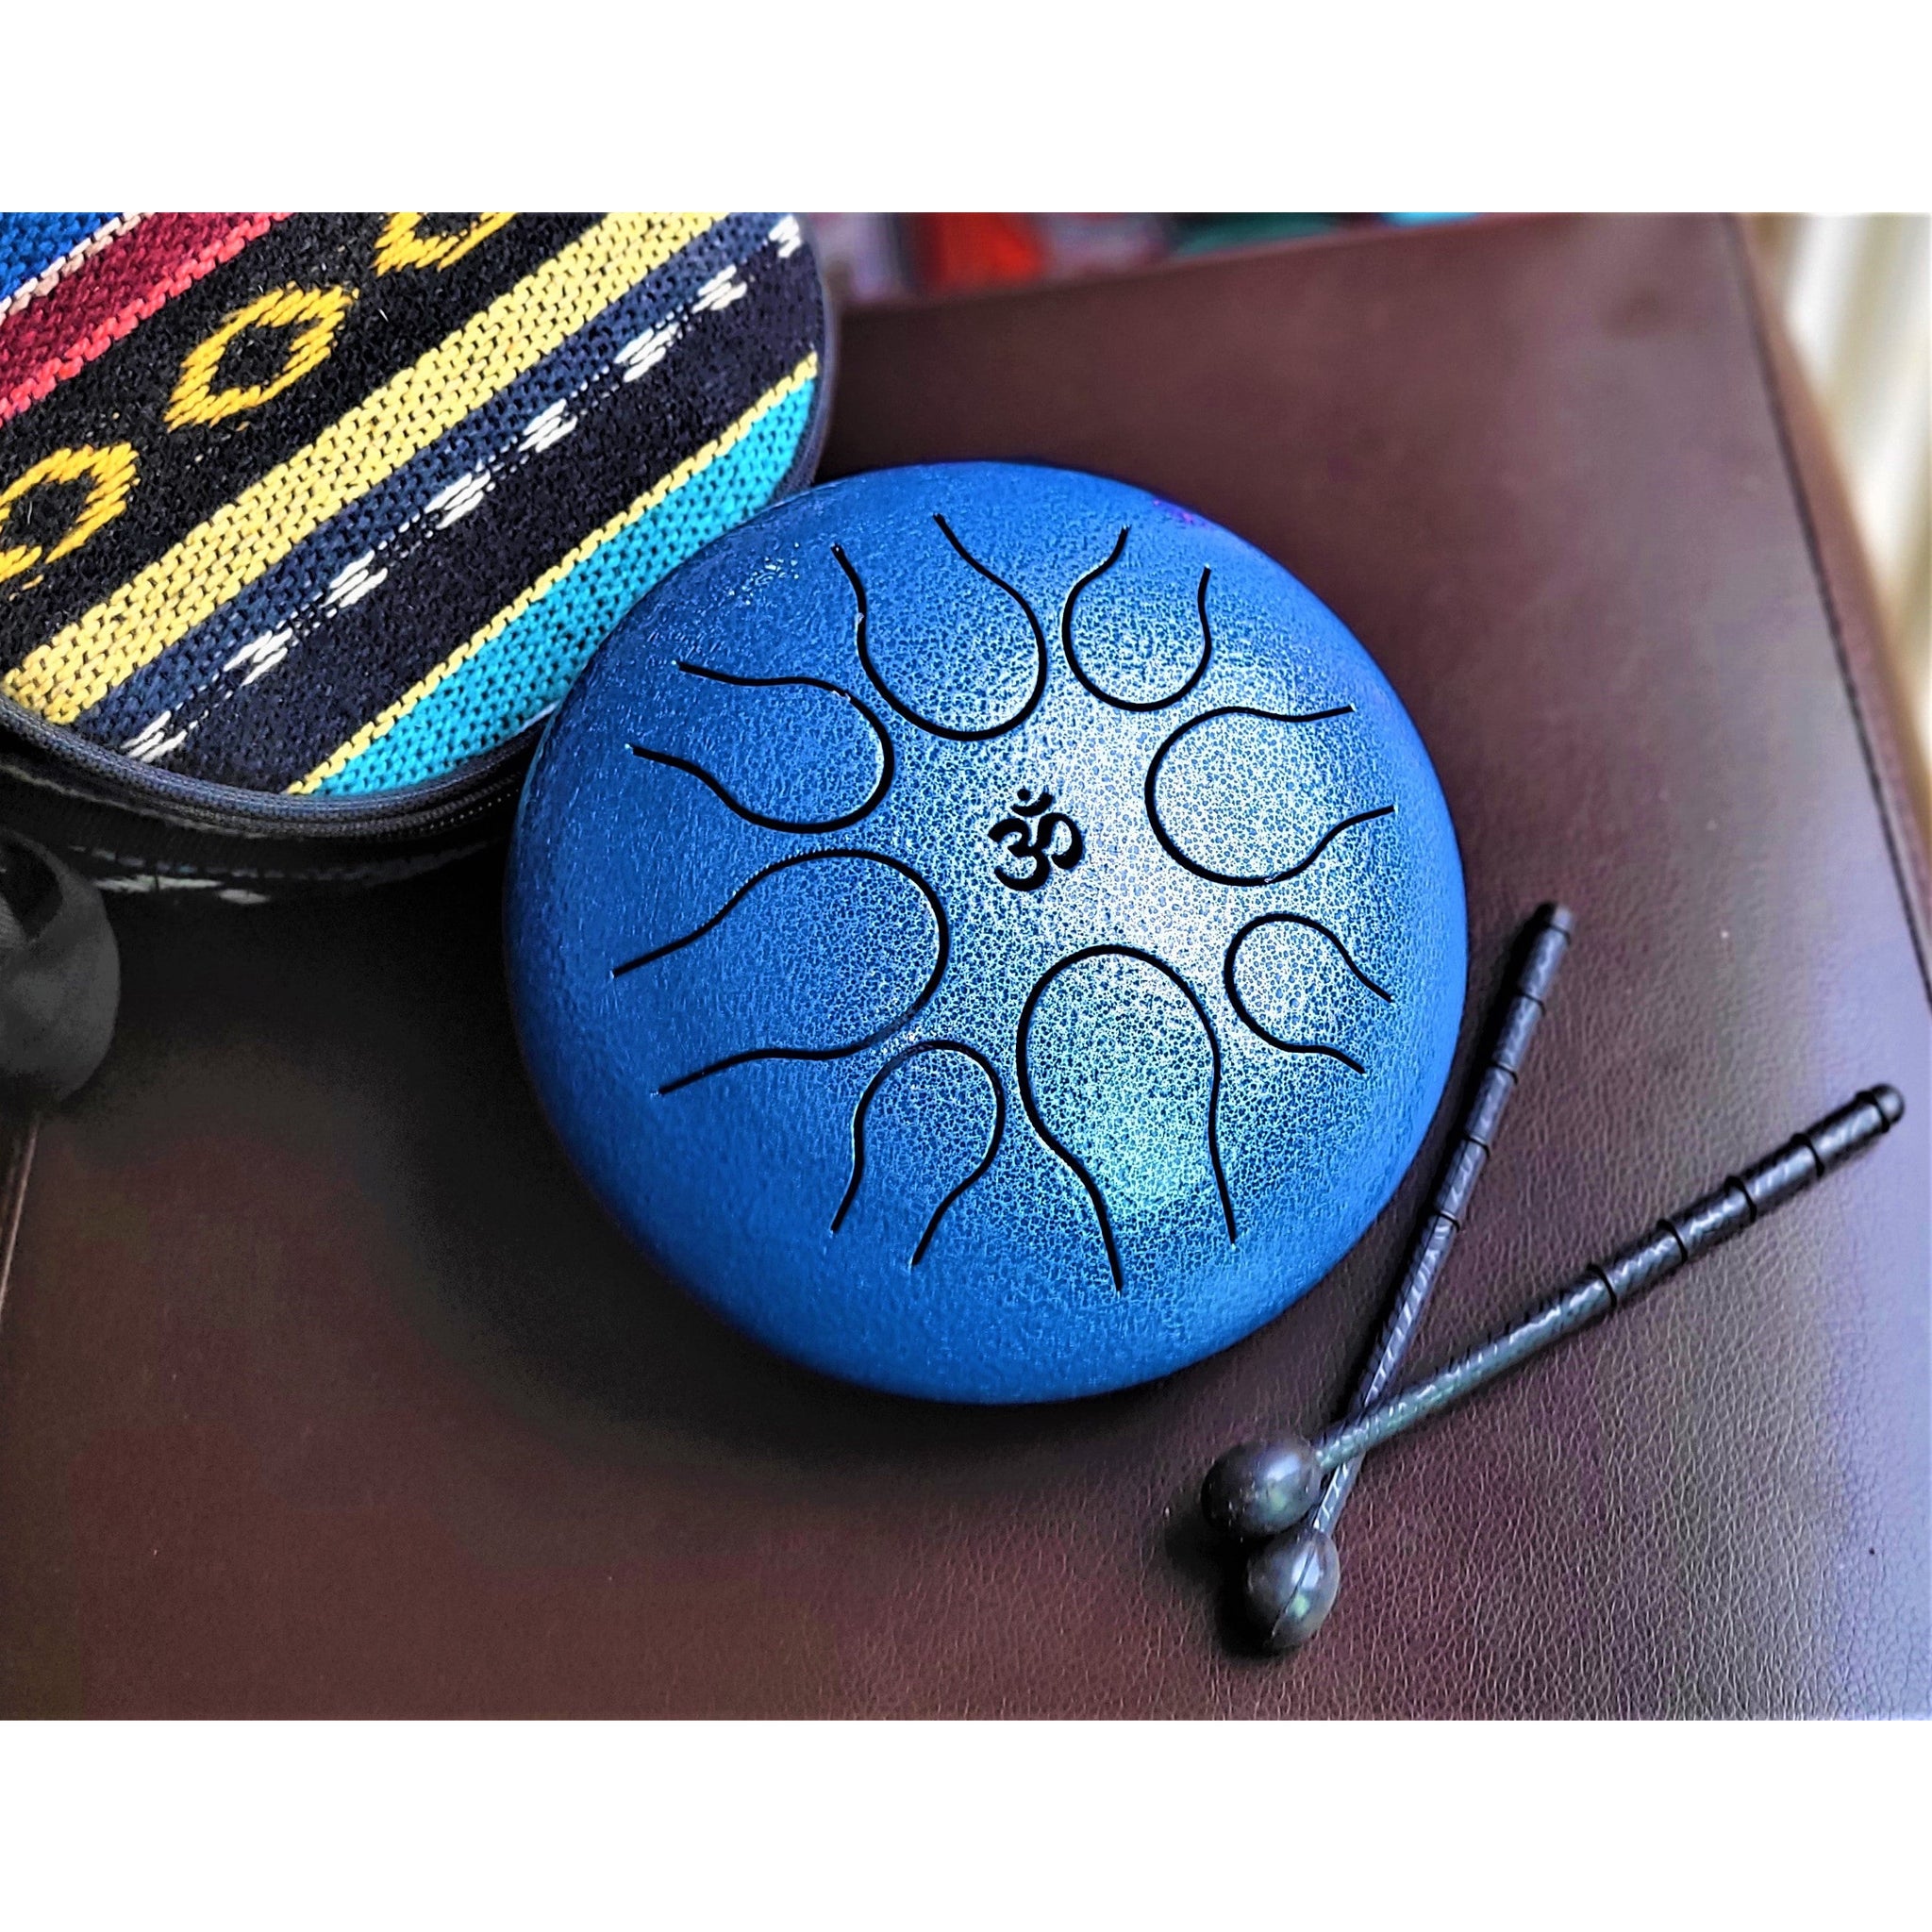 Steel Tongue Drum - The Best Instrument for Healing Music – My Spiritual  Shop